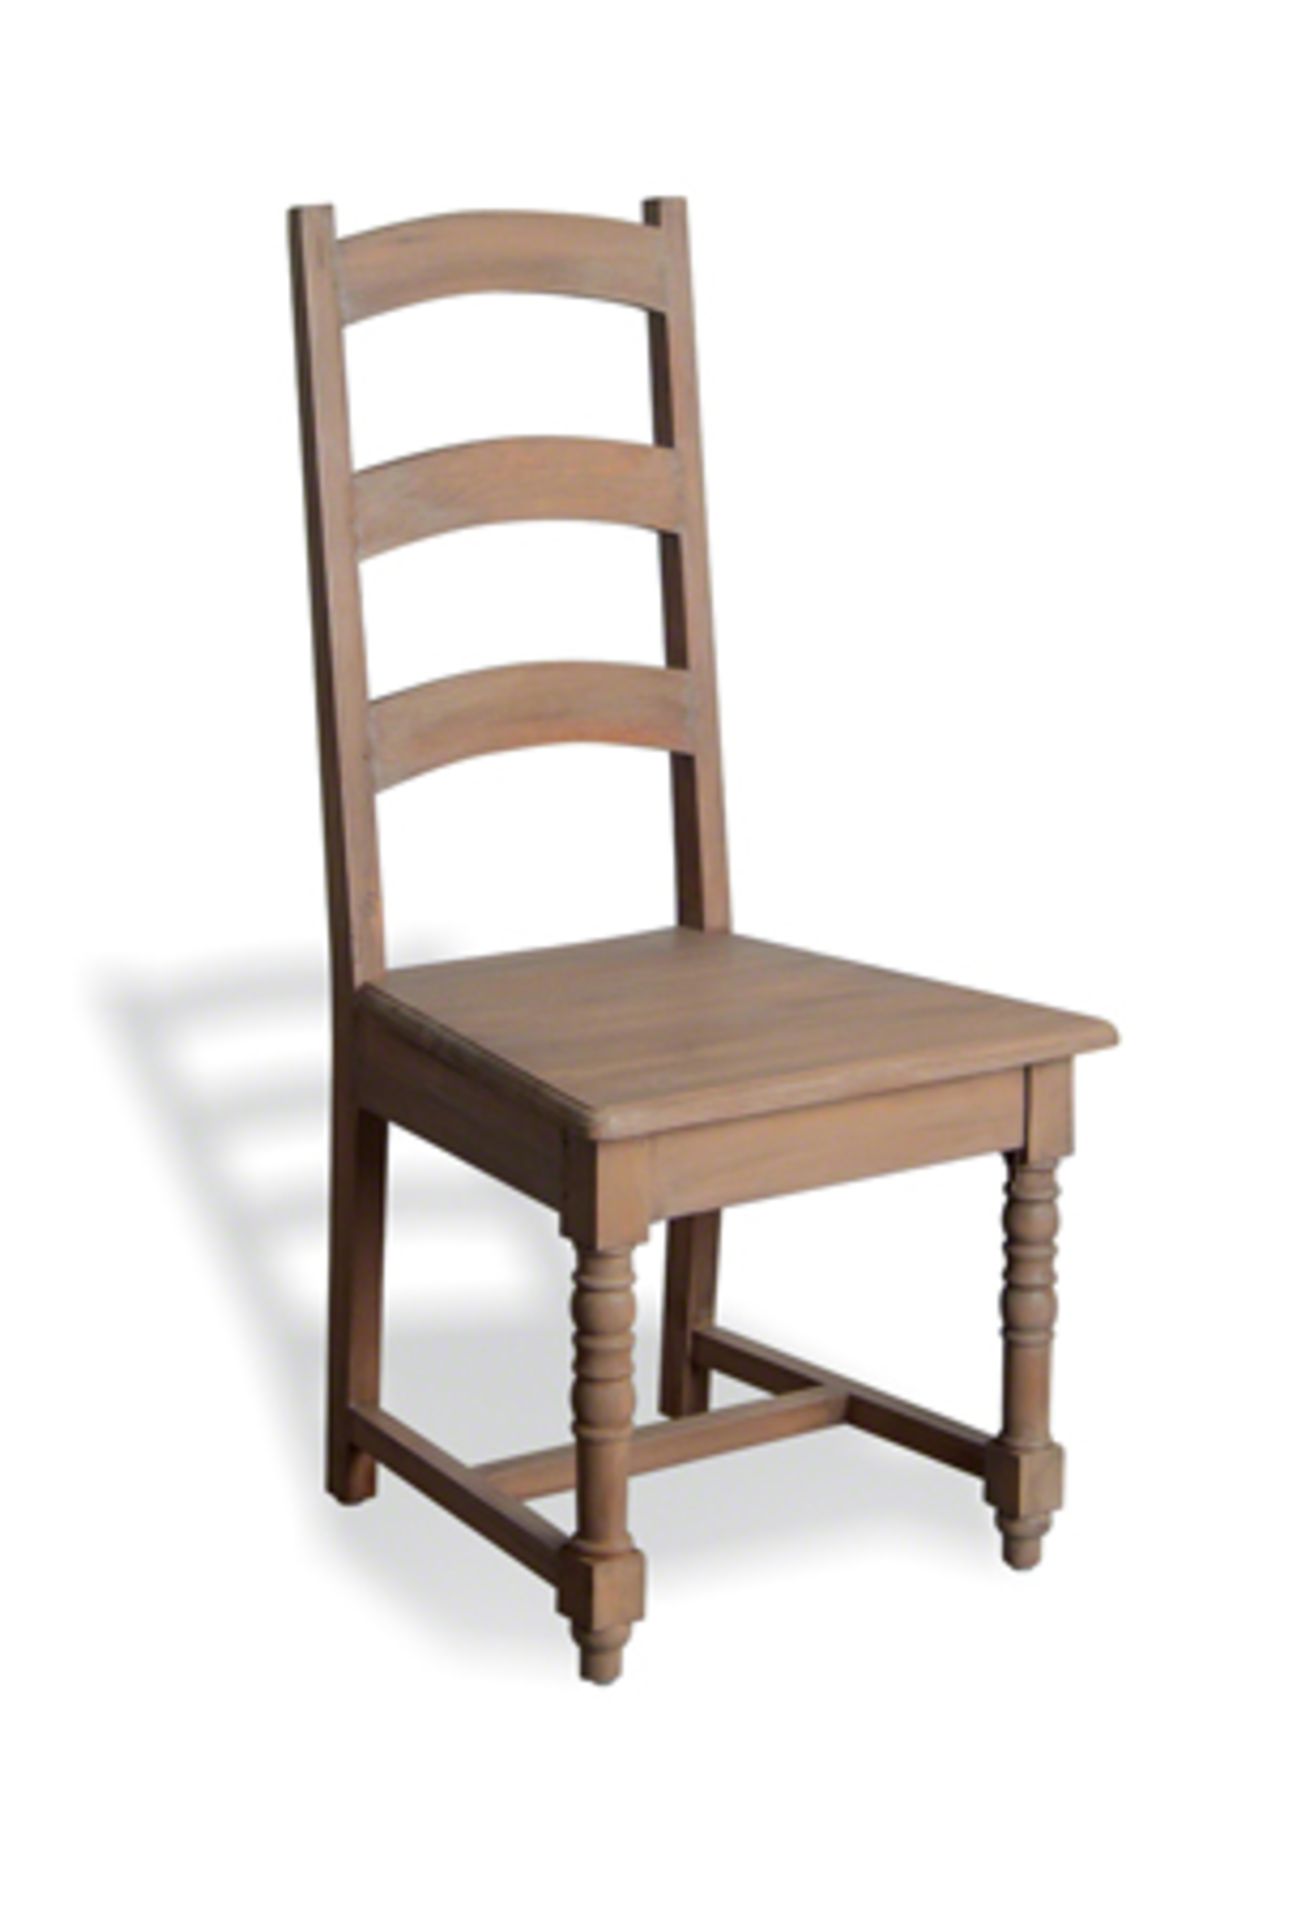 A Pair Of Solid Wood Rustic Pine Farmhouse Dining Chairs 57 X 55 X 108cm (Loc Cob273) - Image 3 of 7